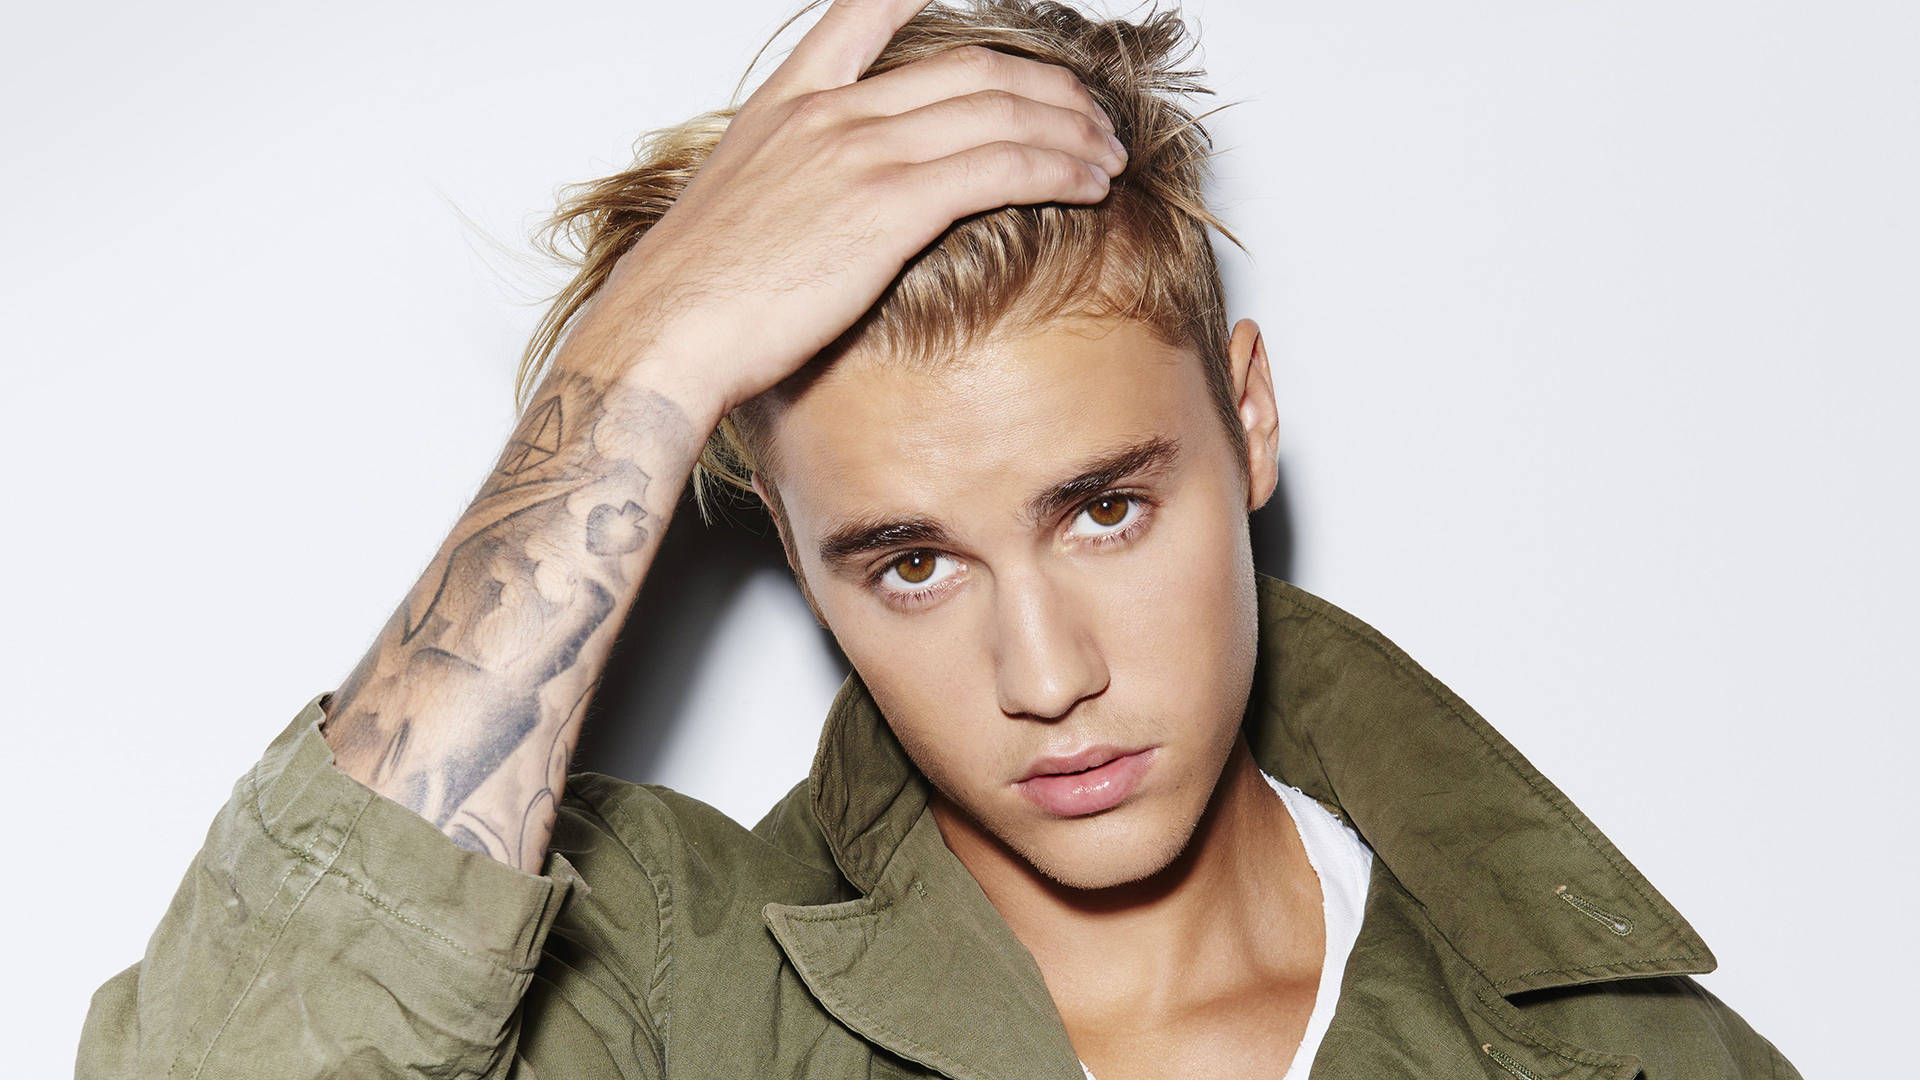 Justin Bieber Looks Stylish In A Green Jacket Background